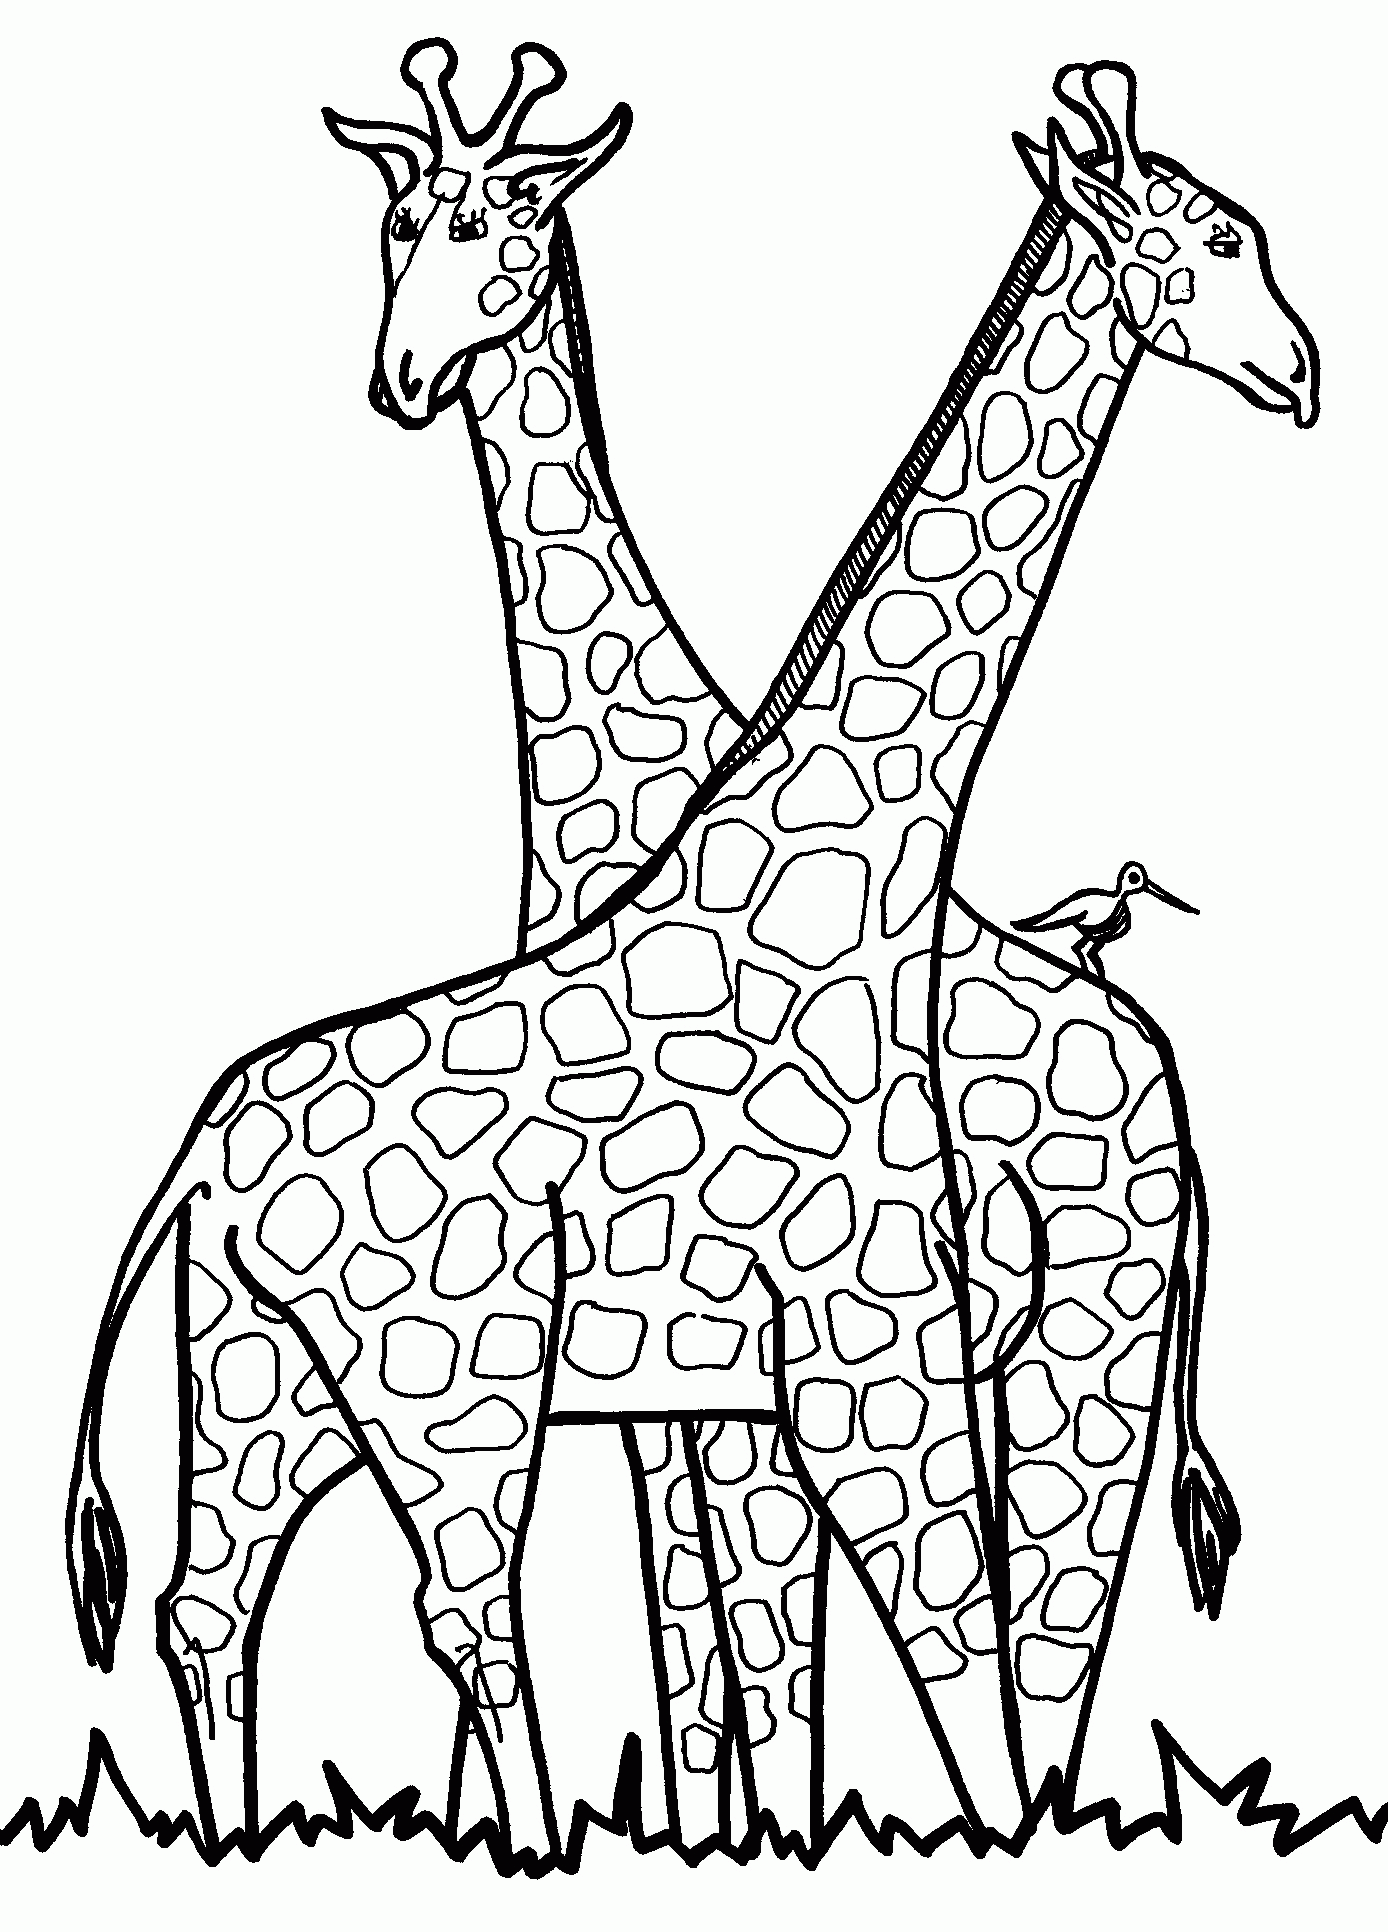 6 Pics of Realistic Giraffe Coloring Pages - Giraffe Coloring ...